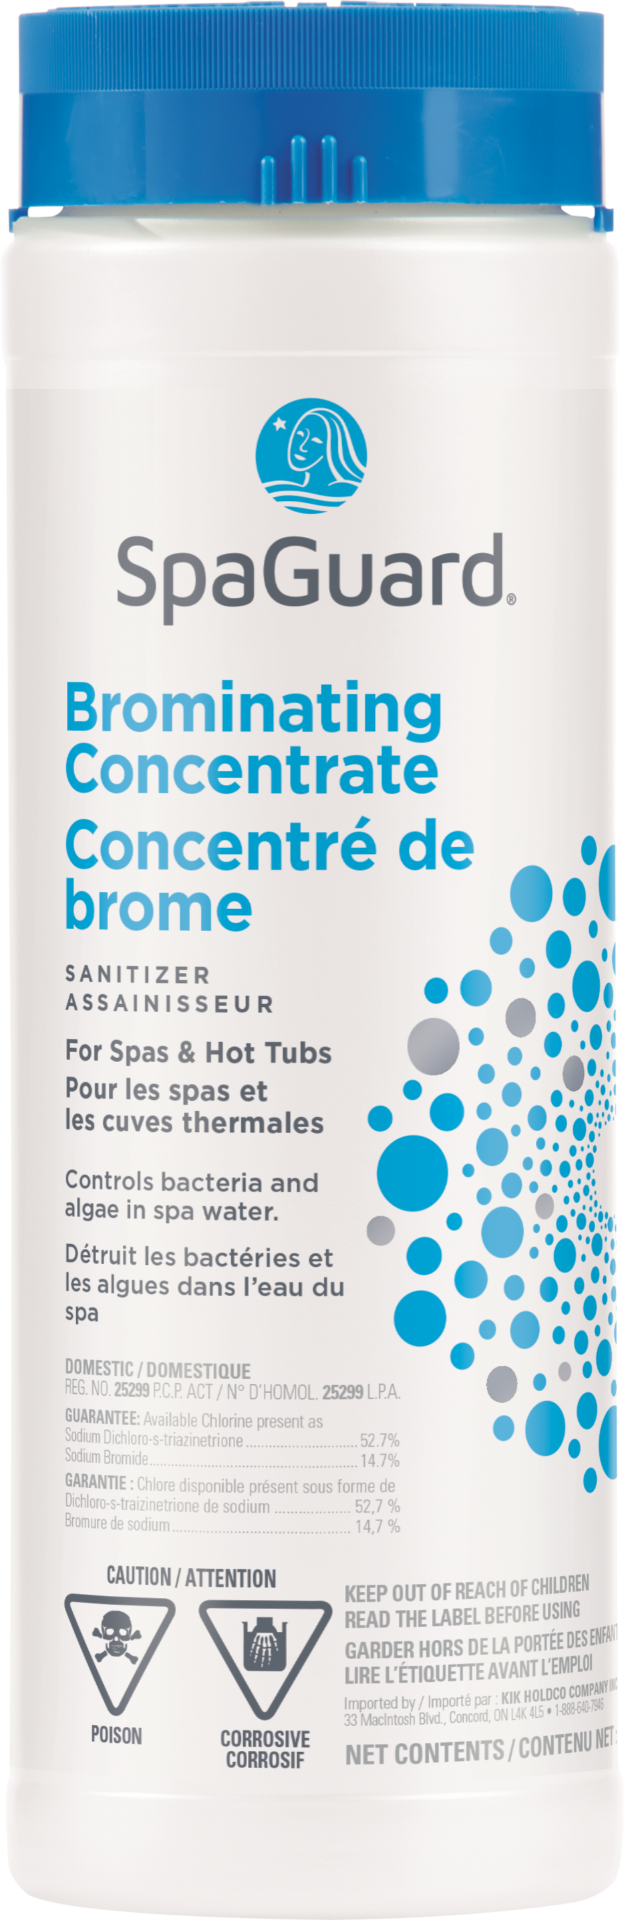 SpaGuard Brominating Concentrate 800g - SpaGuard Brominating Concentrate 800g